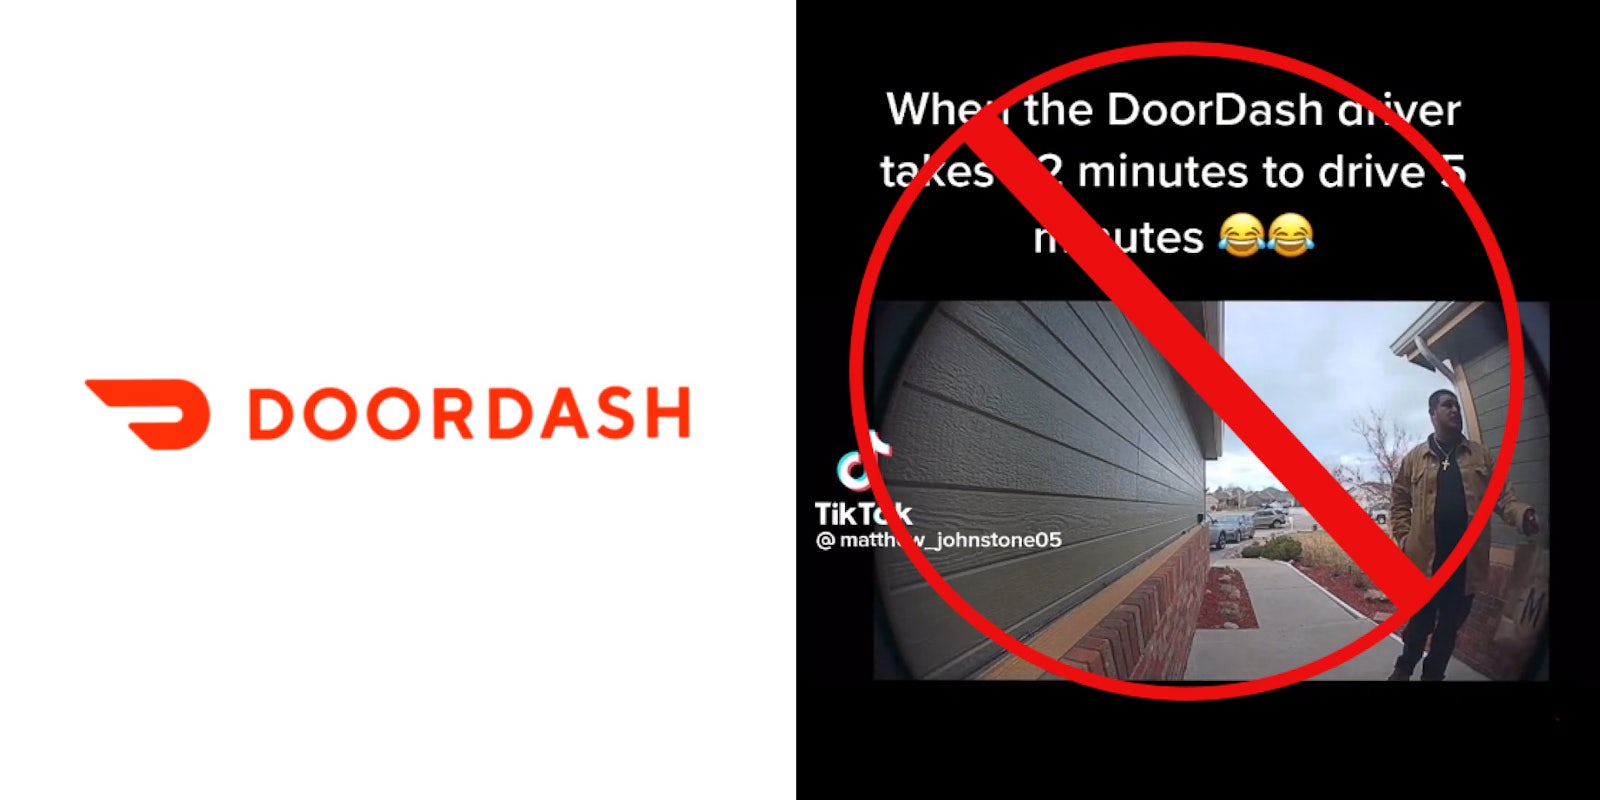 doordash logo on white background (l) doorbell cam recording caption 'When the door dash driver takes 32 minutes to drive 5 minutes' with red circle with line through it in center (r)